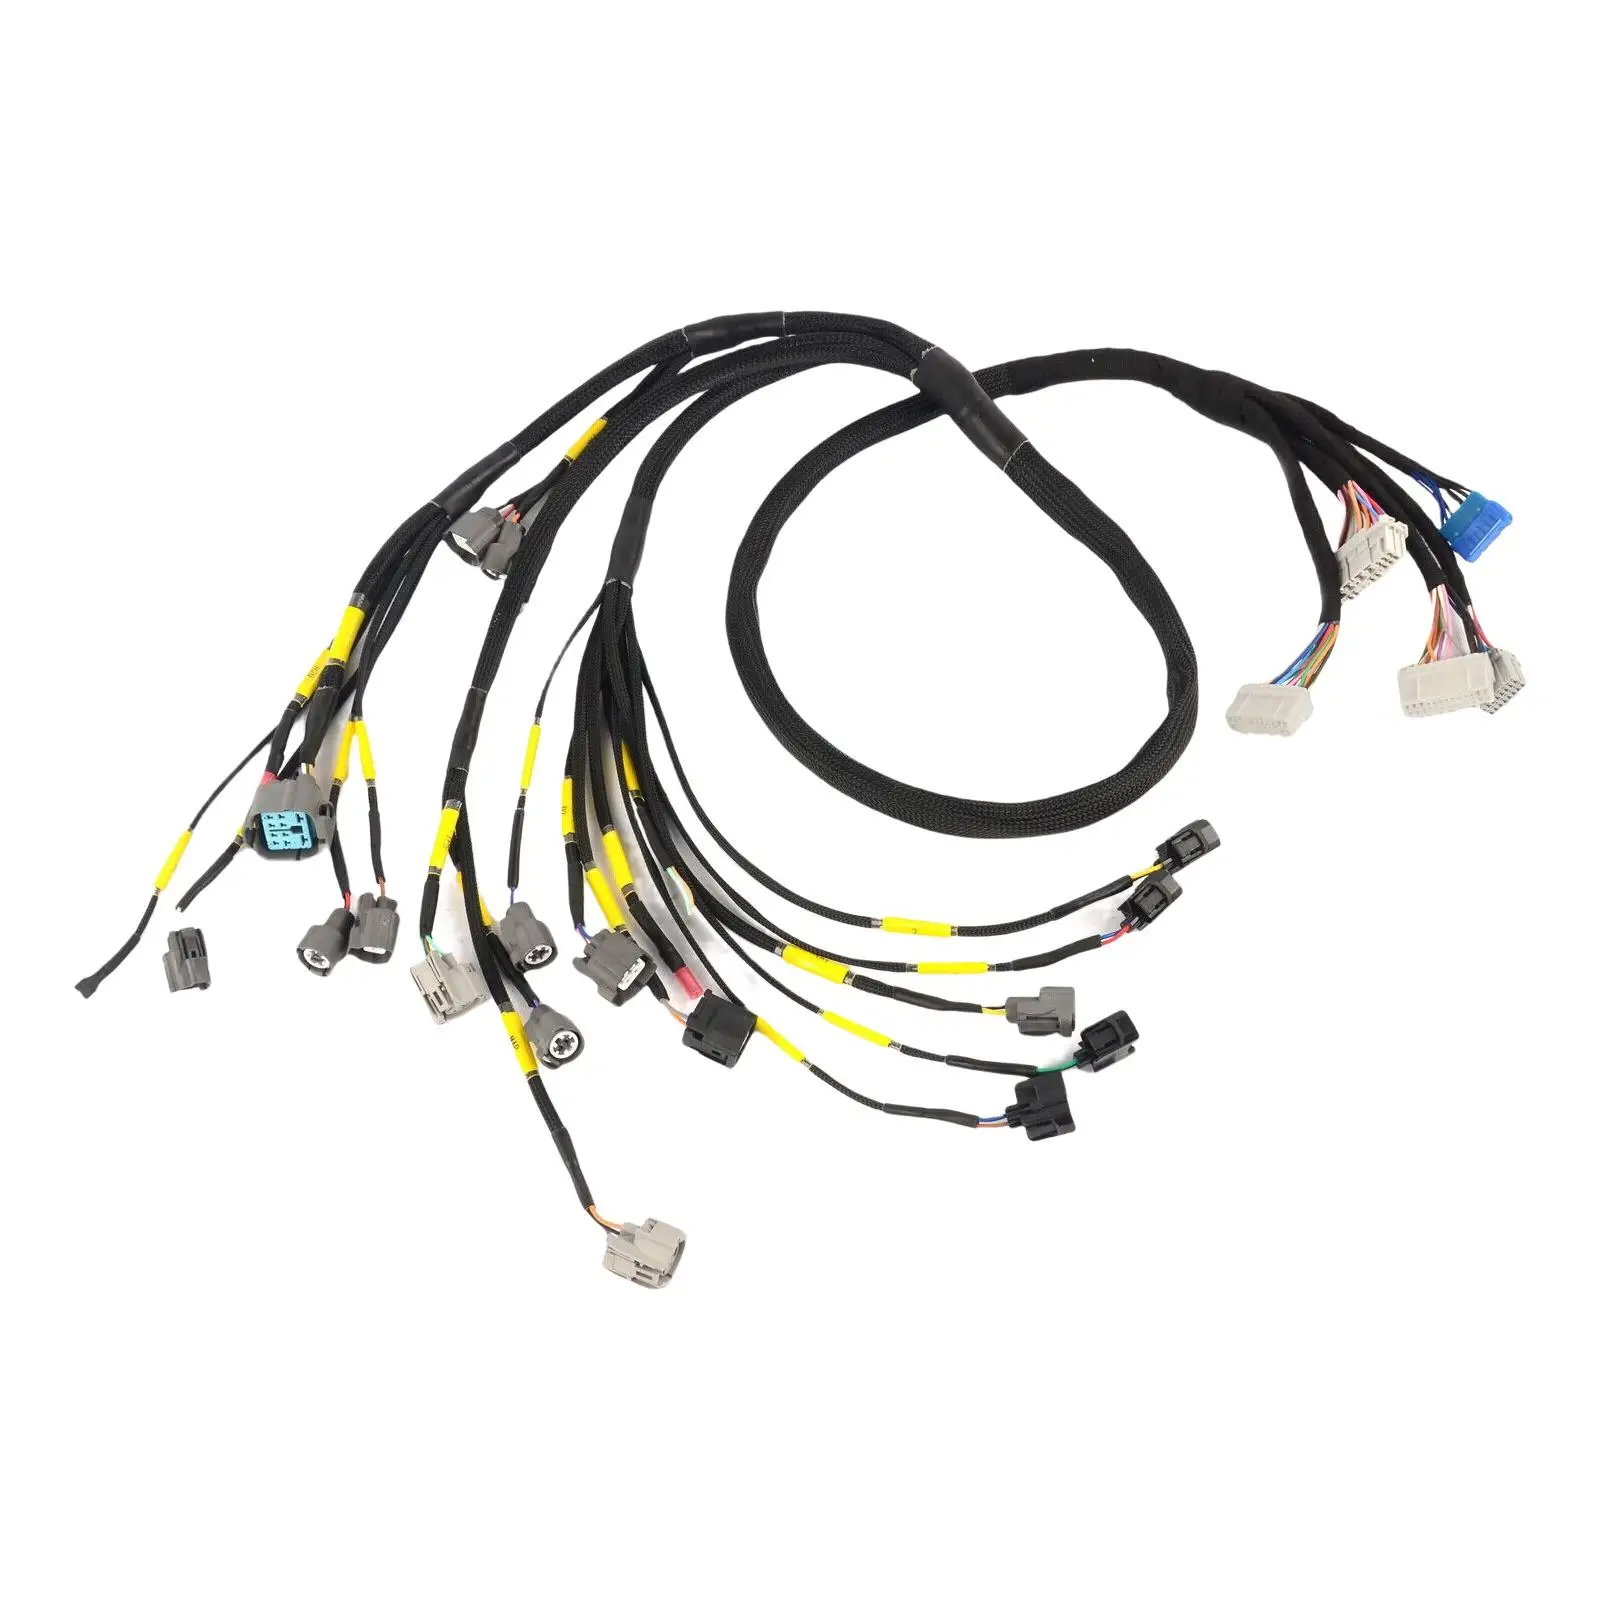 Car Engine Harness Cnch-Obd2-1 Vehicle Accessories Replaces Easily Install Spare Parts Professional Stable durable